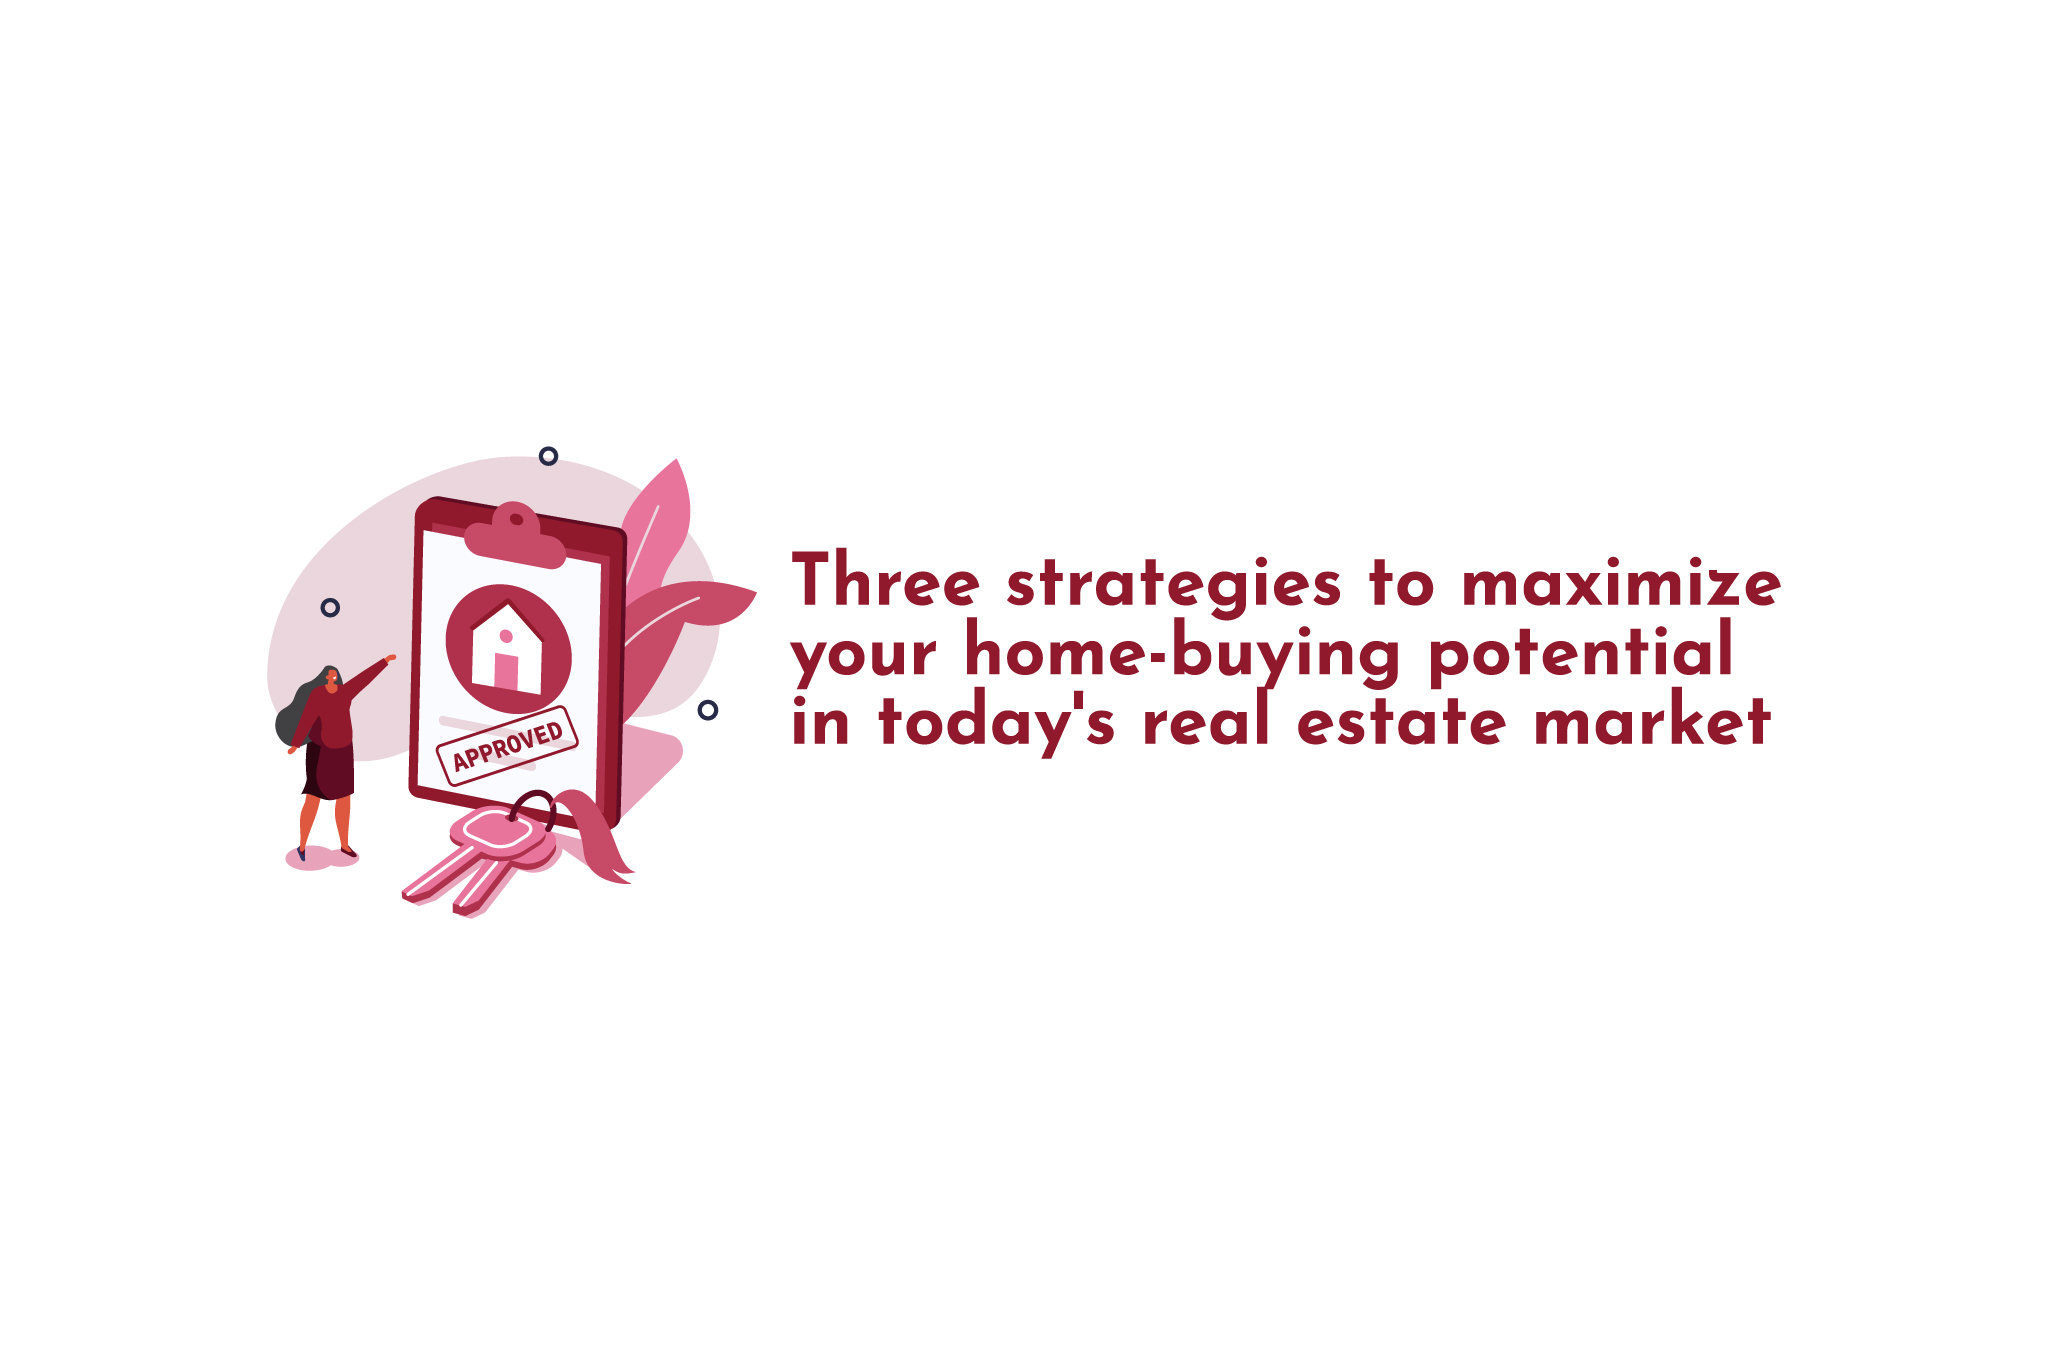 Three strategies to maximize your home-buying potential in today's real estate market